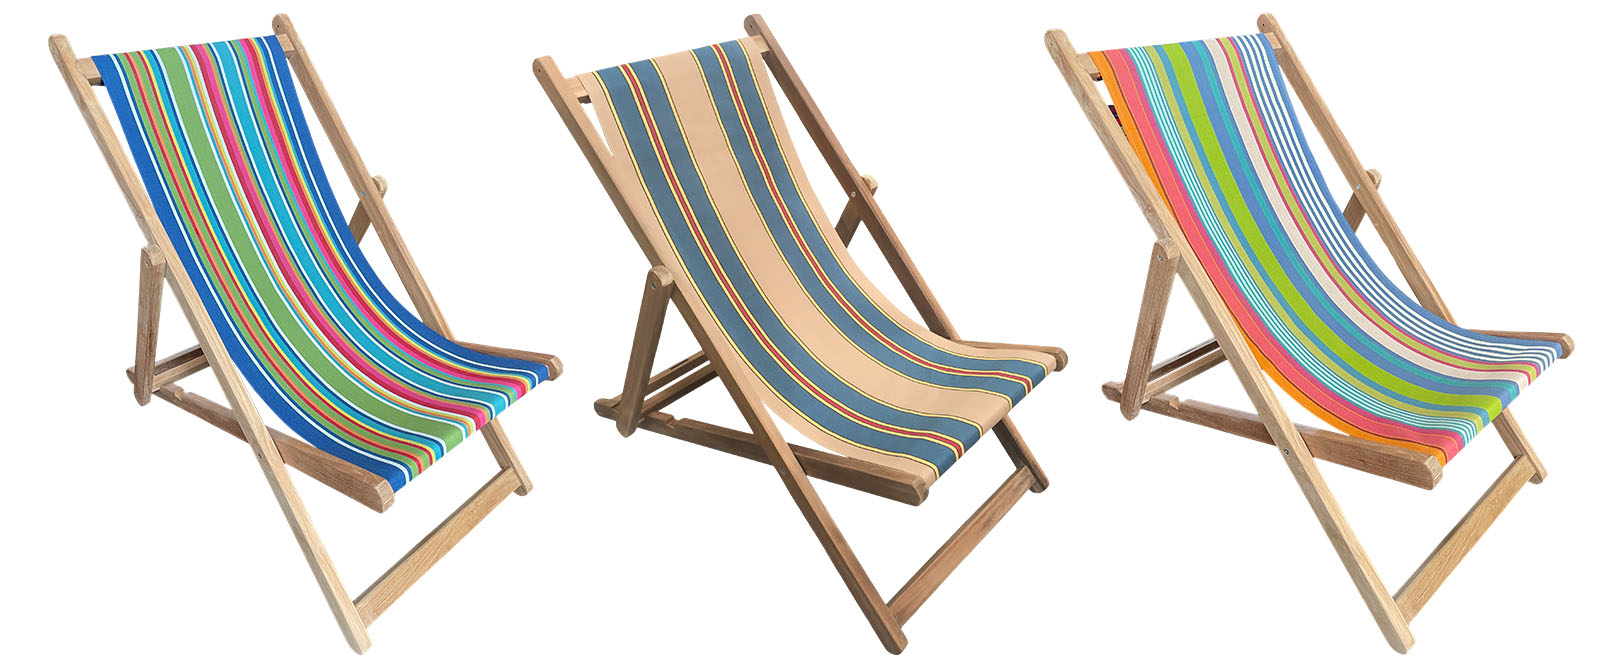 Deckchairs | Buy Folding Wooden Deck Chairs